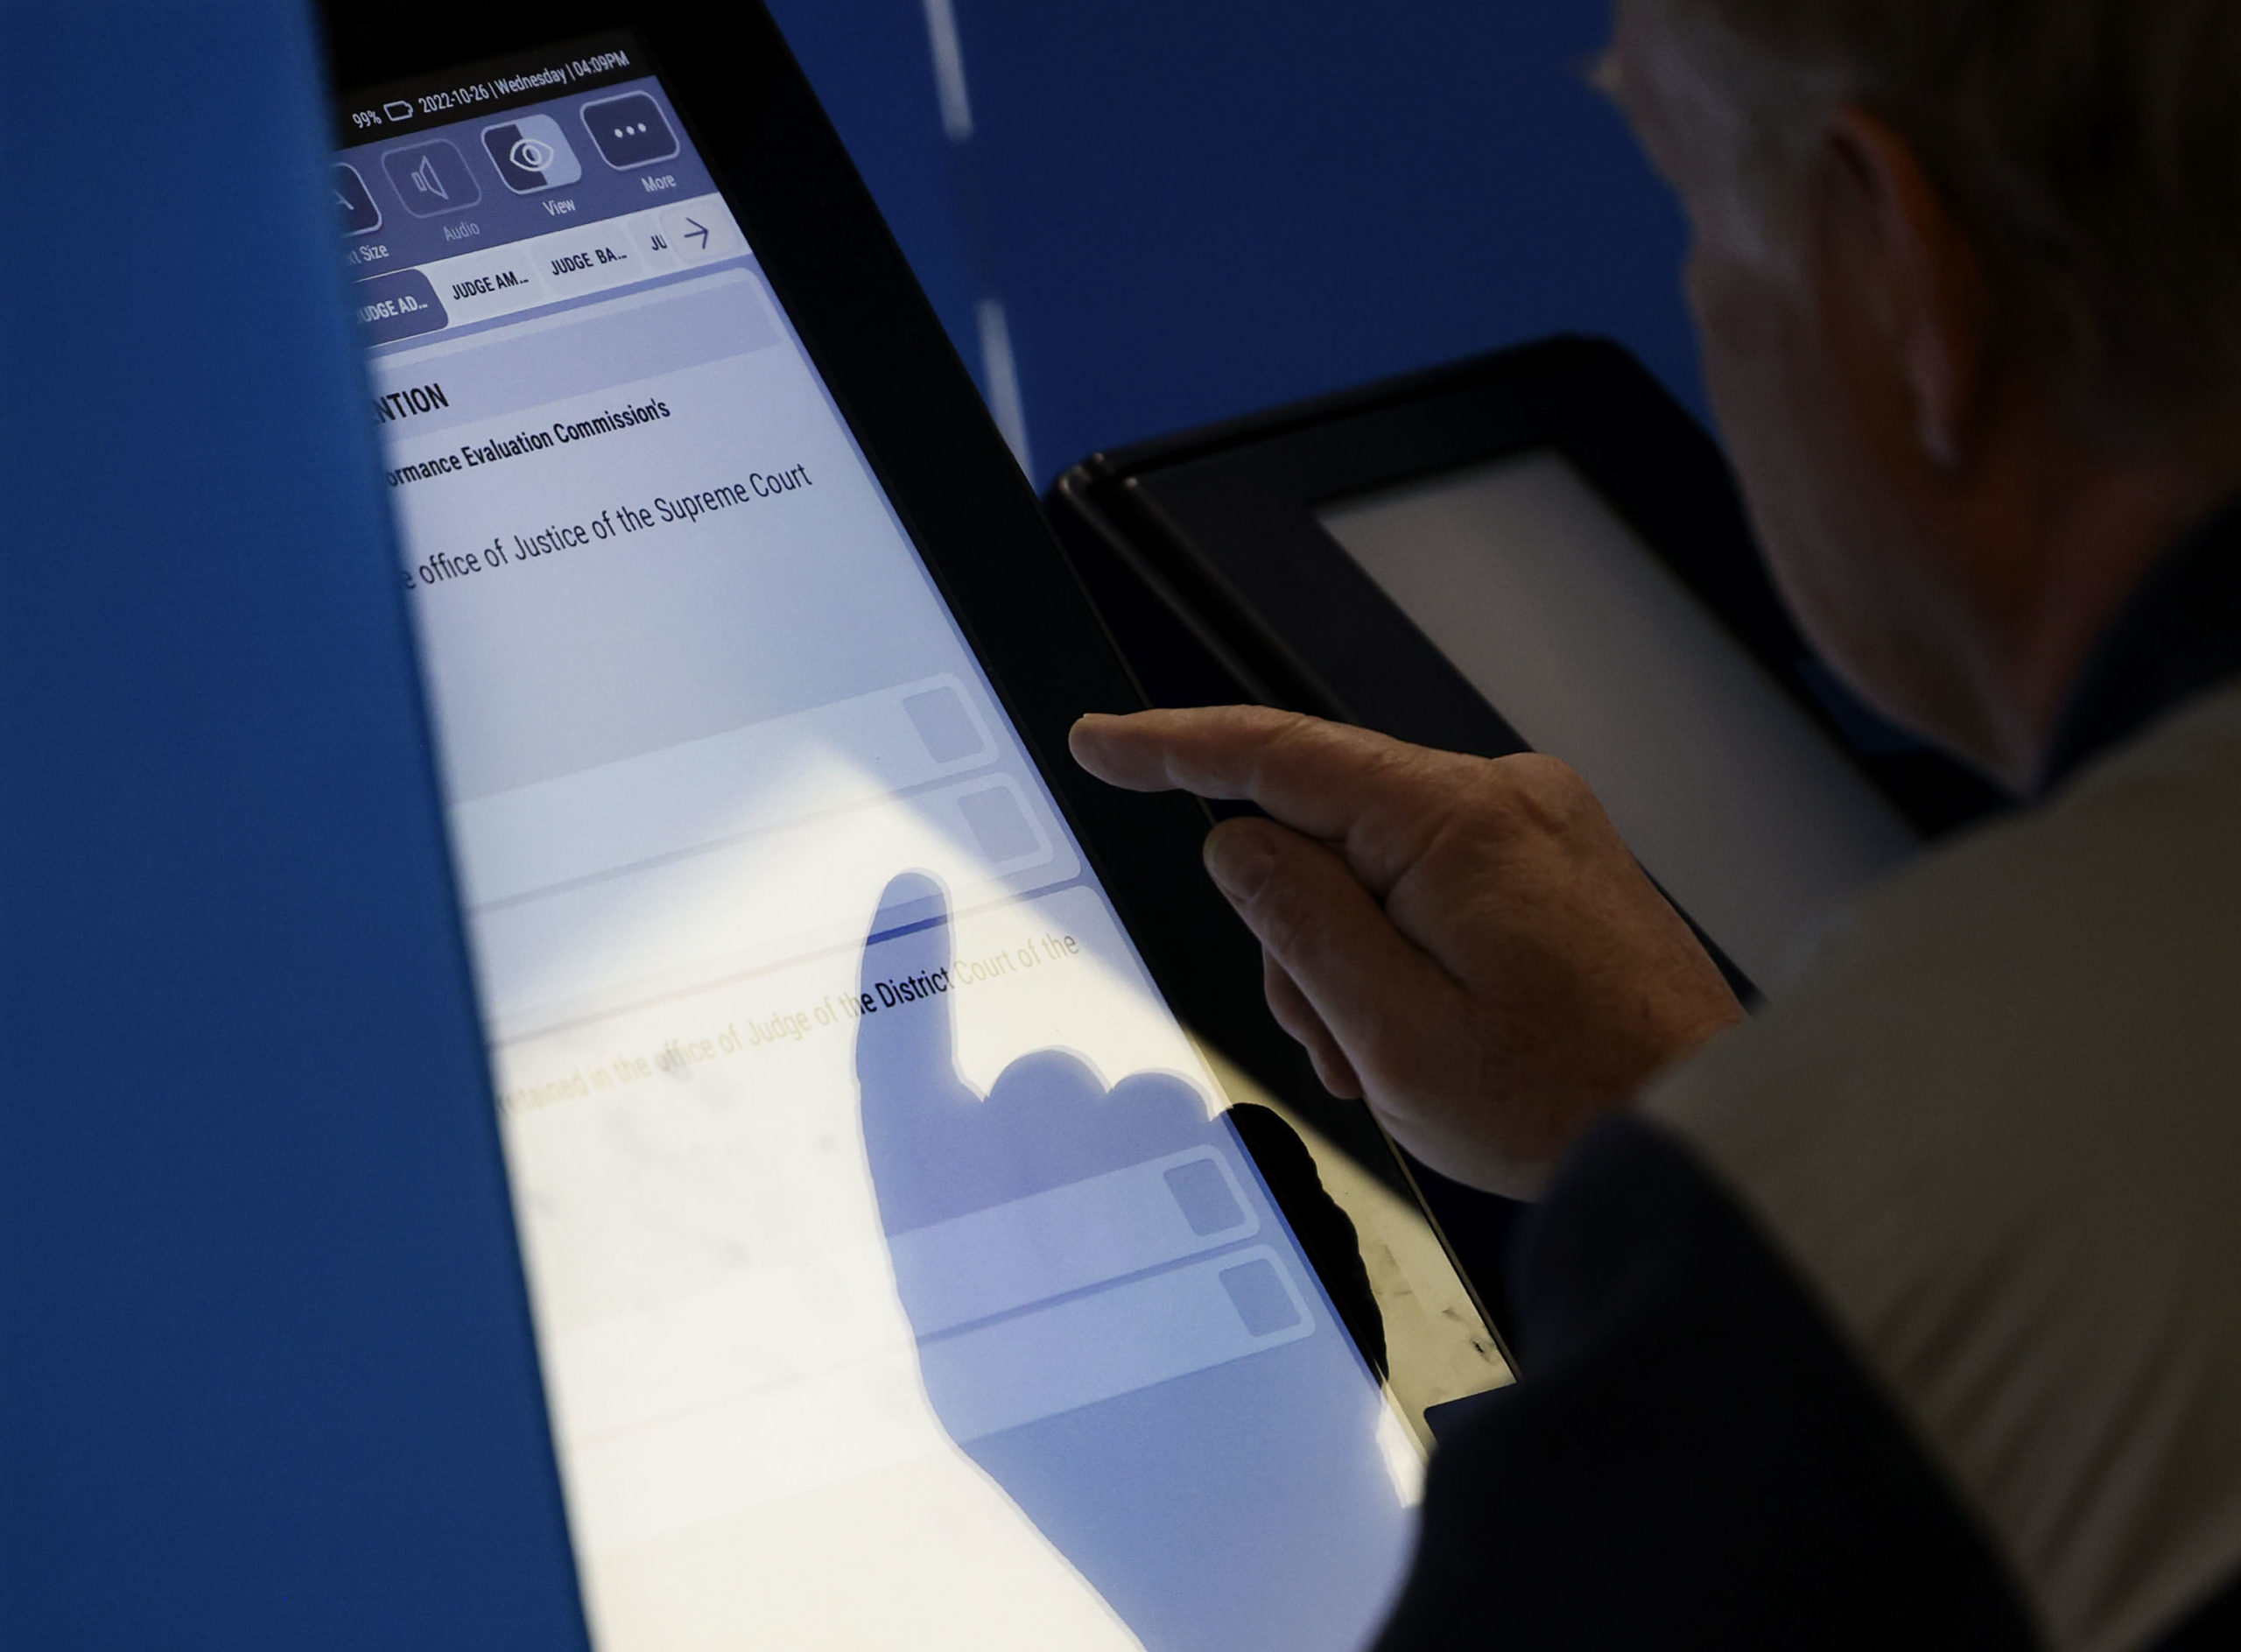 A man votes in the in-office early voting room in the south building of the Salt Lake County Govern...